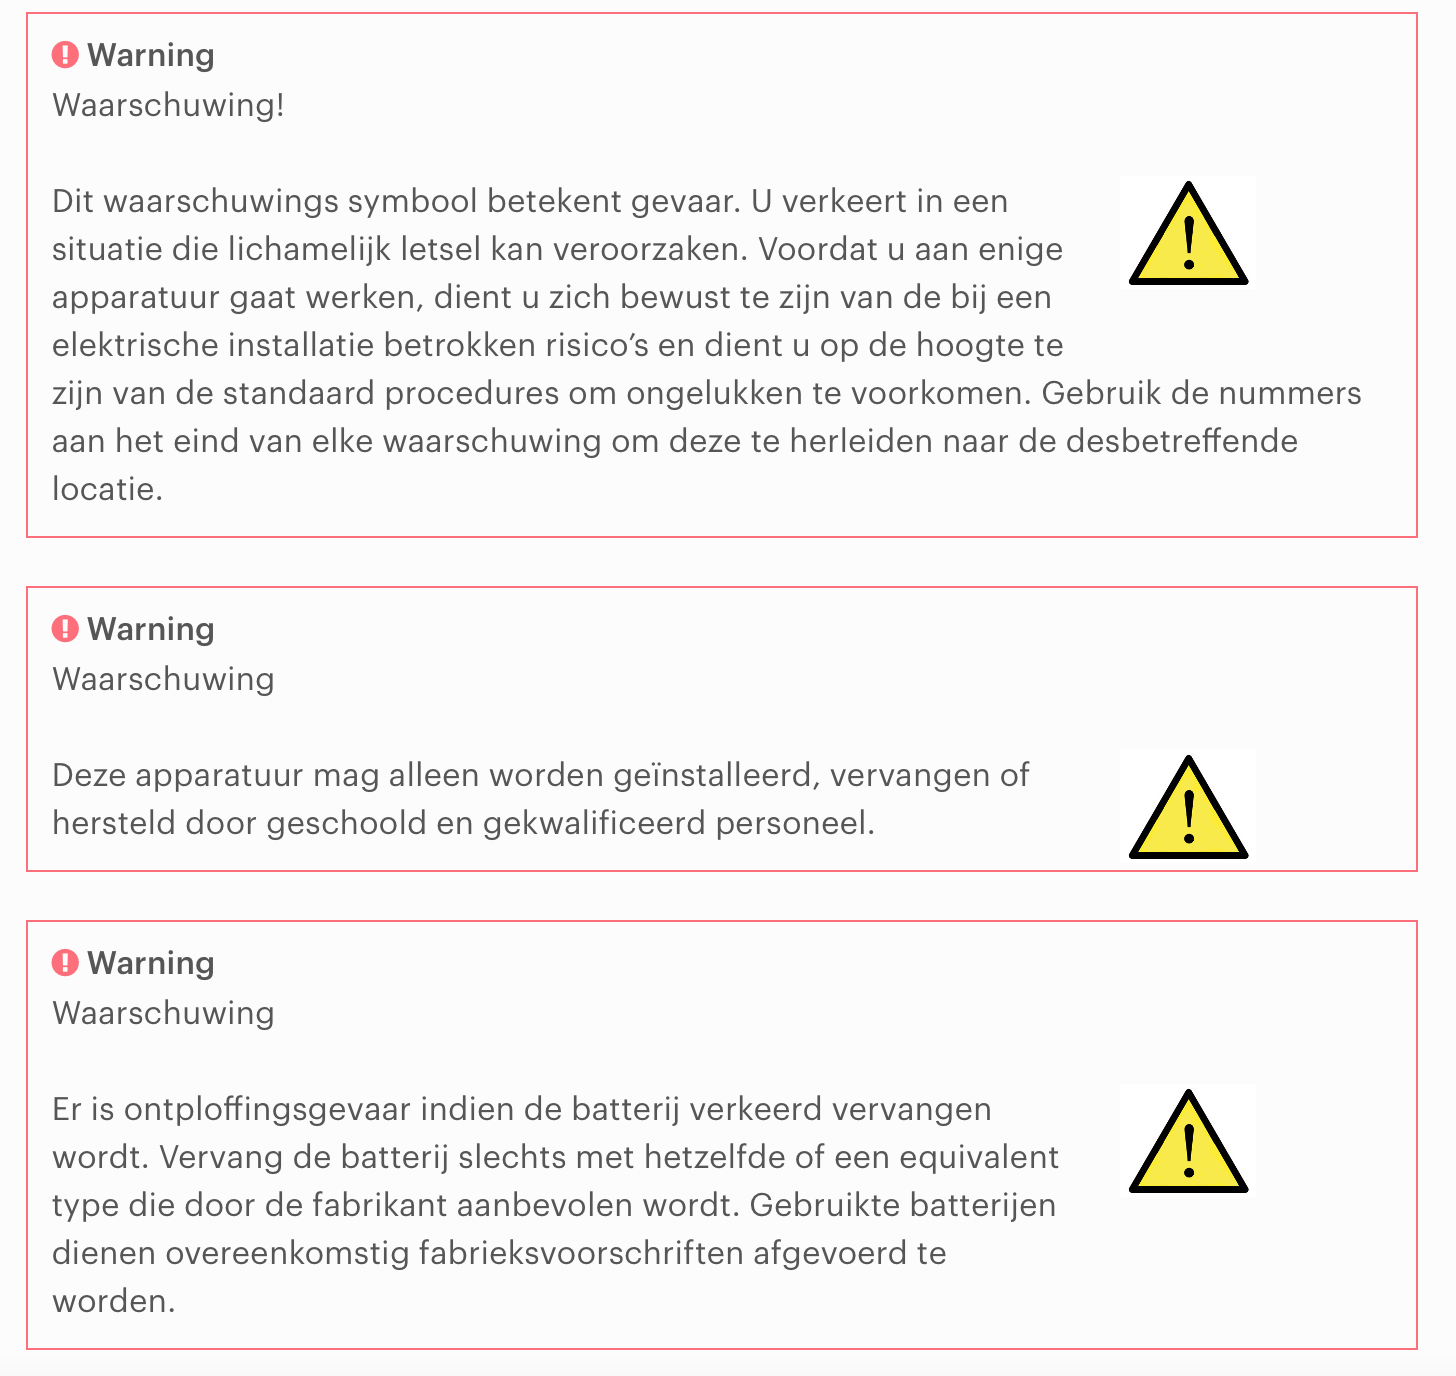 _images/nl_NL-warnings-1.png